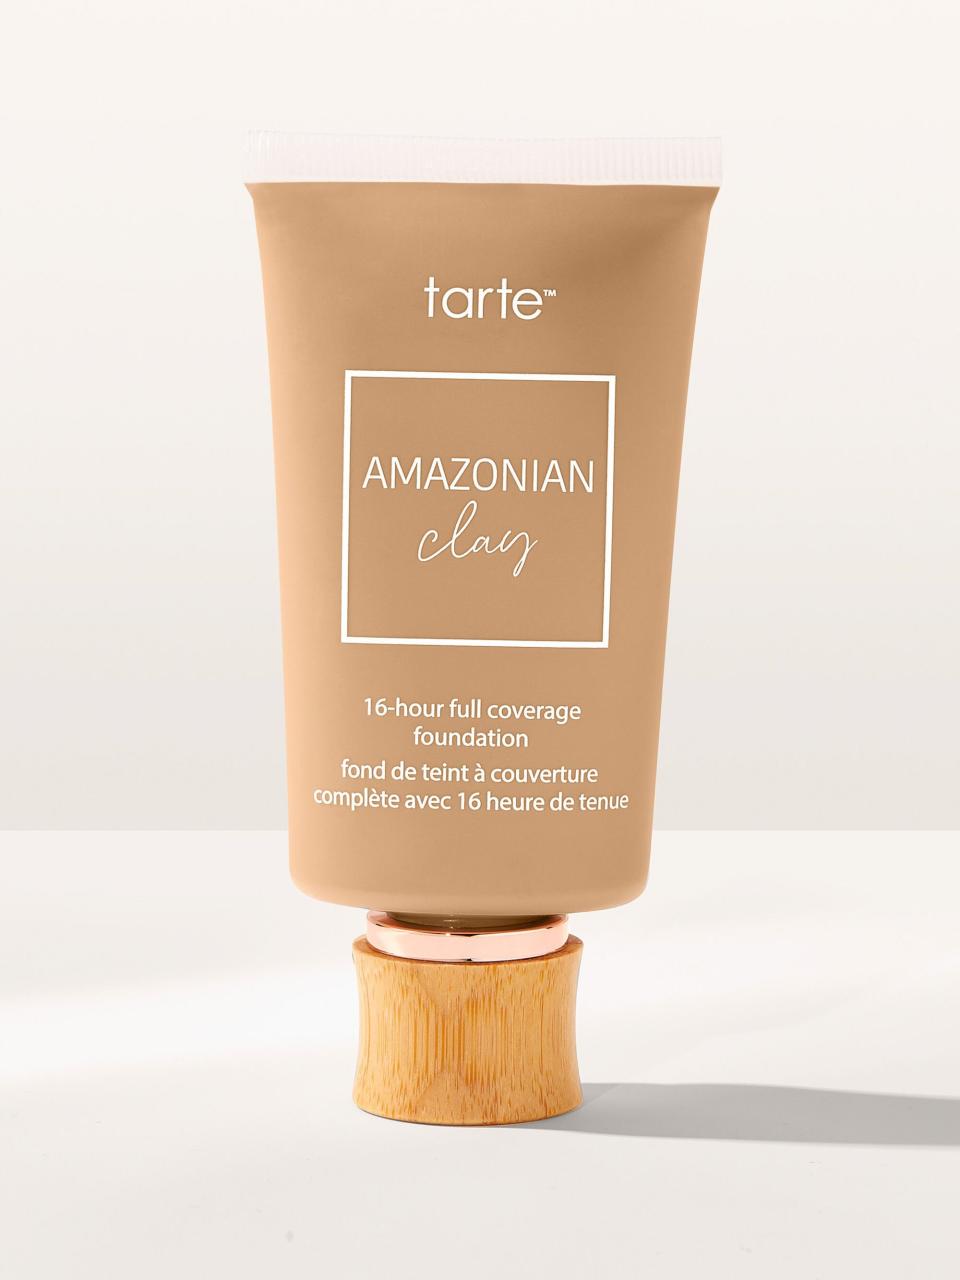 6) Amazonian clay 16-hour full coverage foundation